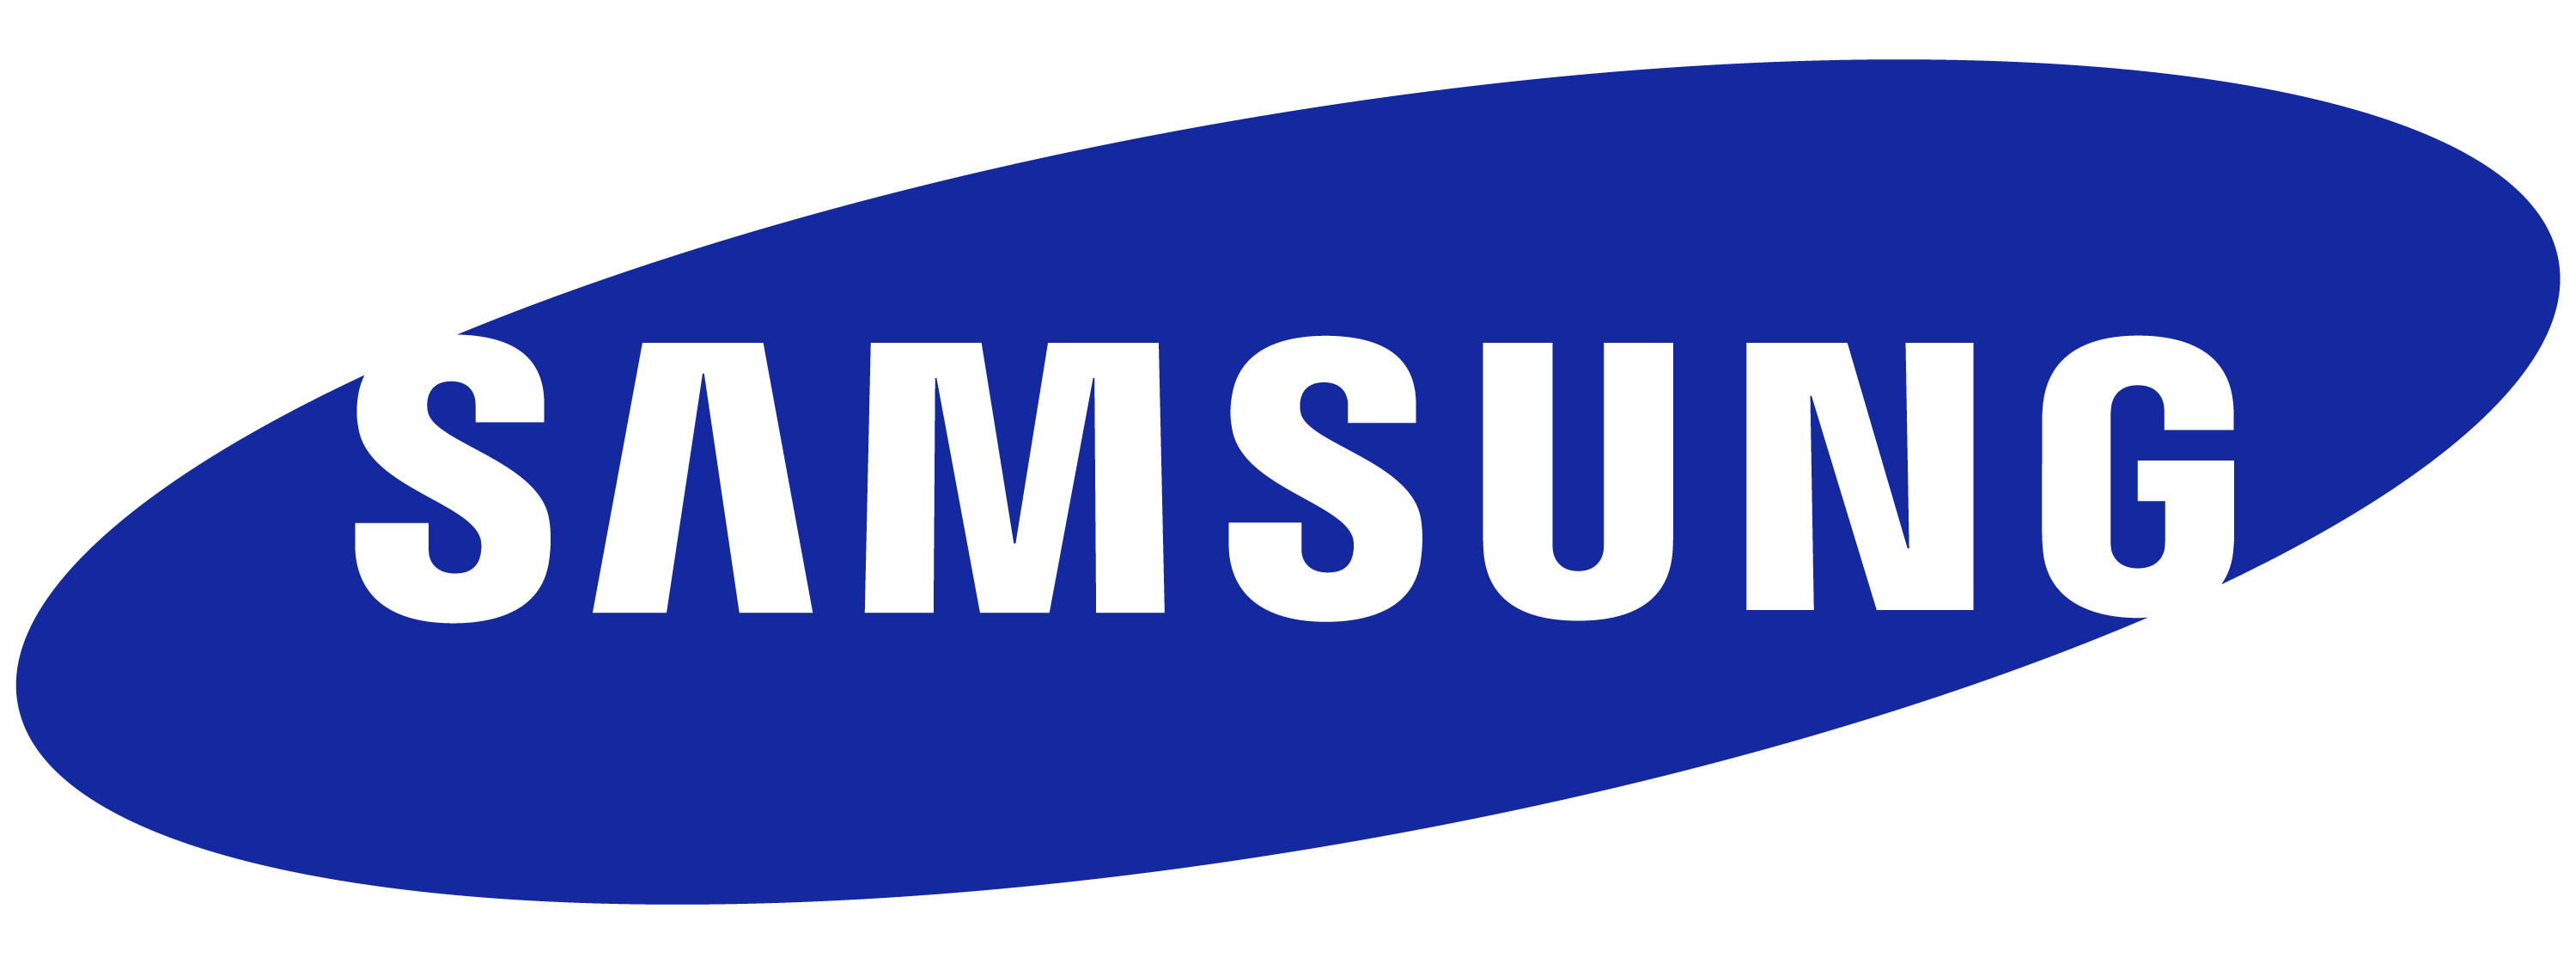 Samsung Android Logo - Pin by diana Watson on Samsung | Samsung, Samsung galaxy, Samsung logo